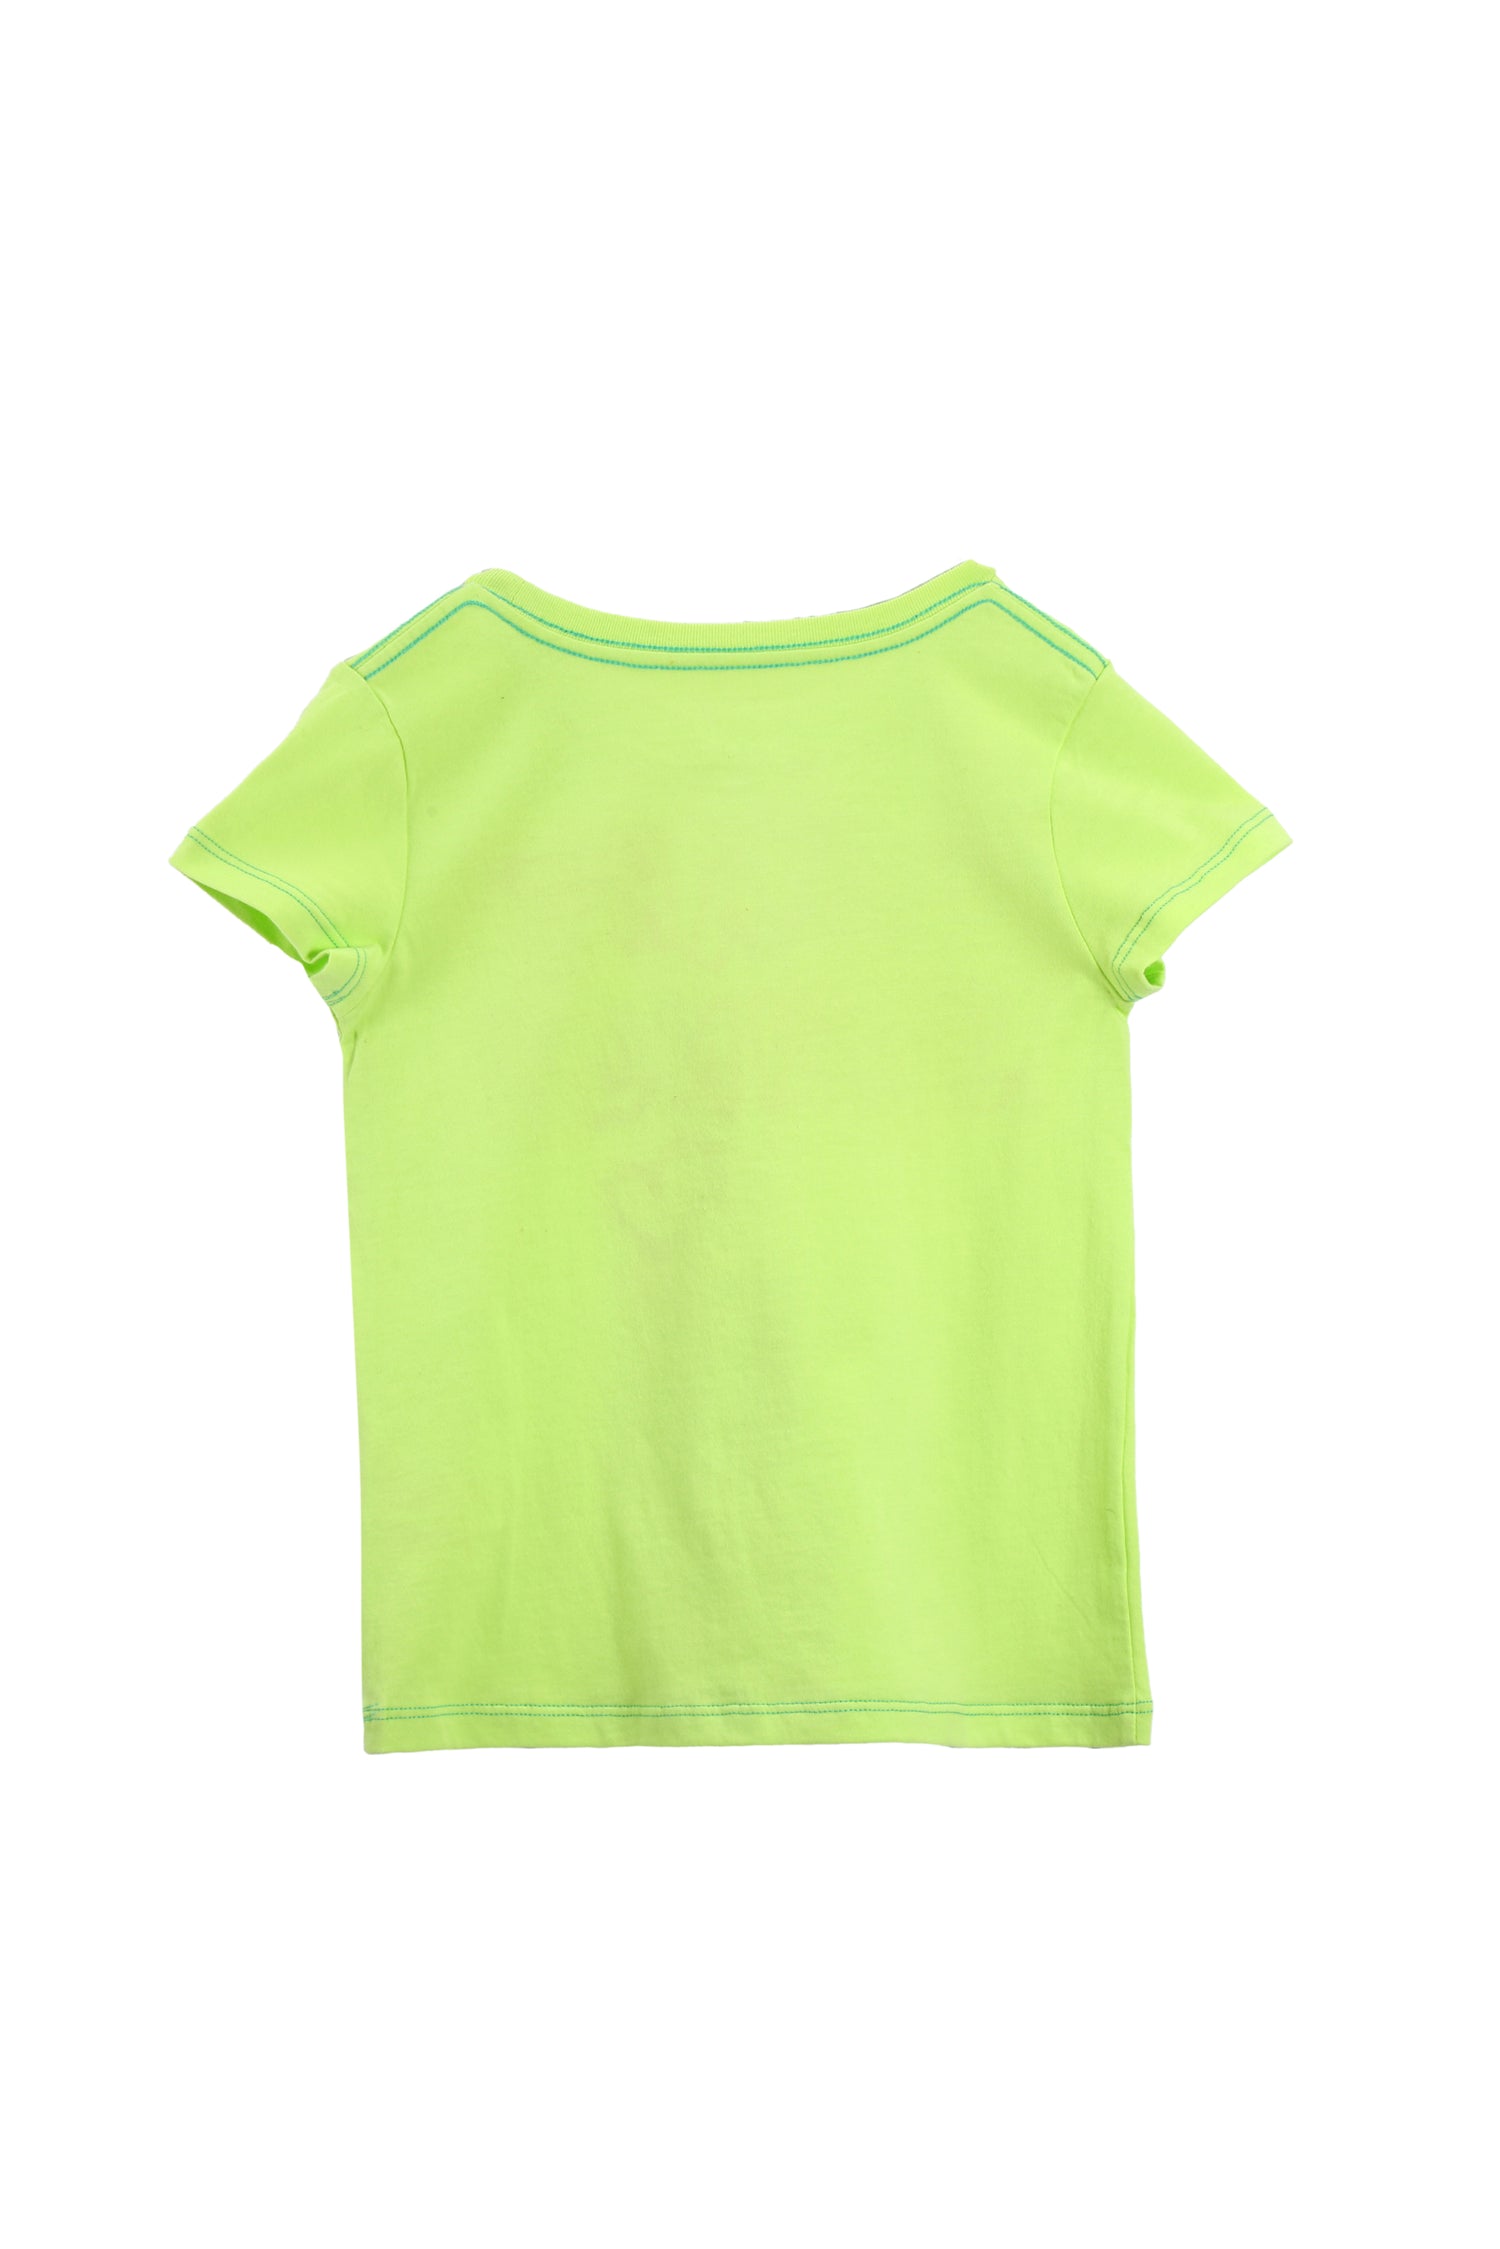 BACK OF LIME GREEN T-SHIRT